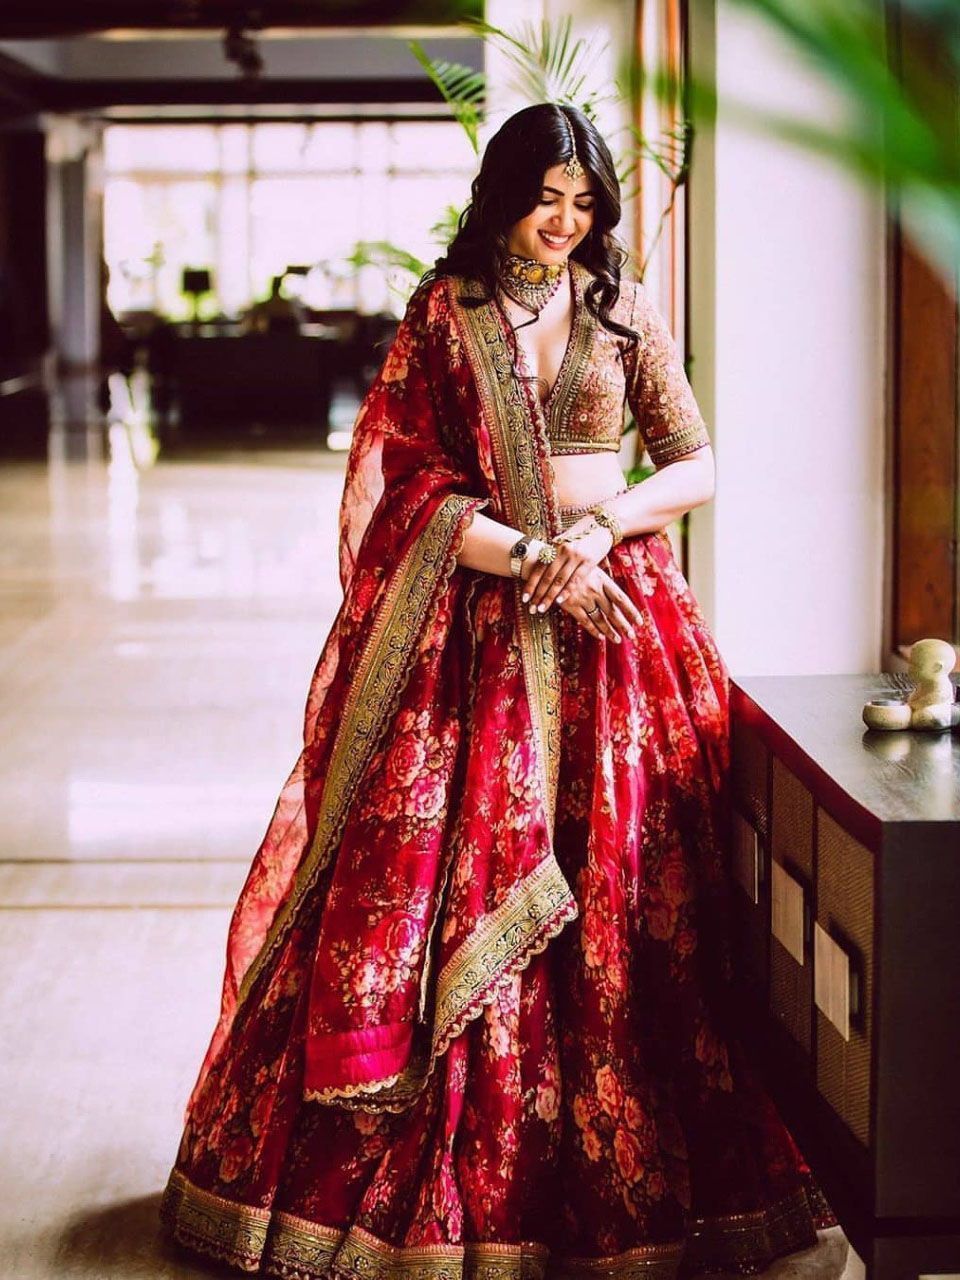 Are Sabyasachi Bridal Outfits Becoming A Repetitive Look?